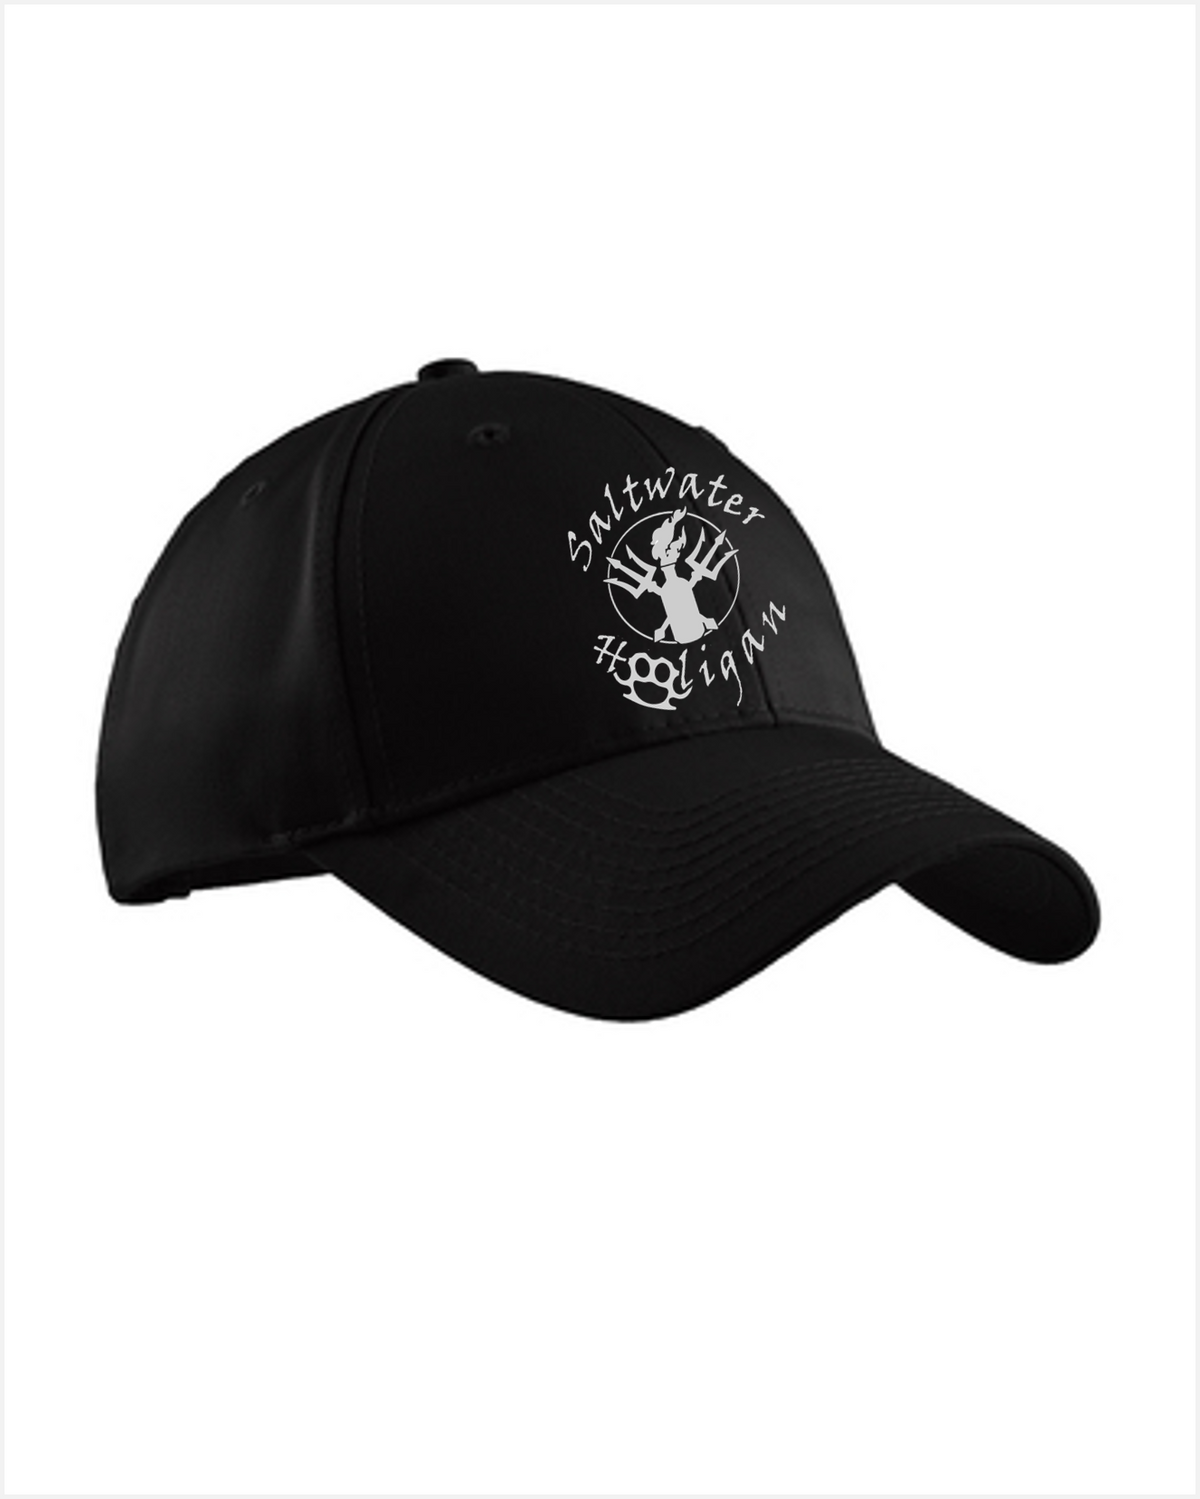 SALTWATER HOOLIGAN EMBROIDERED AND FISHING BASEBALL CAP